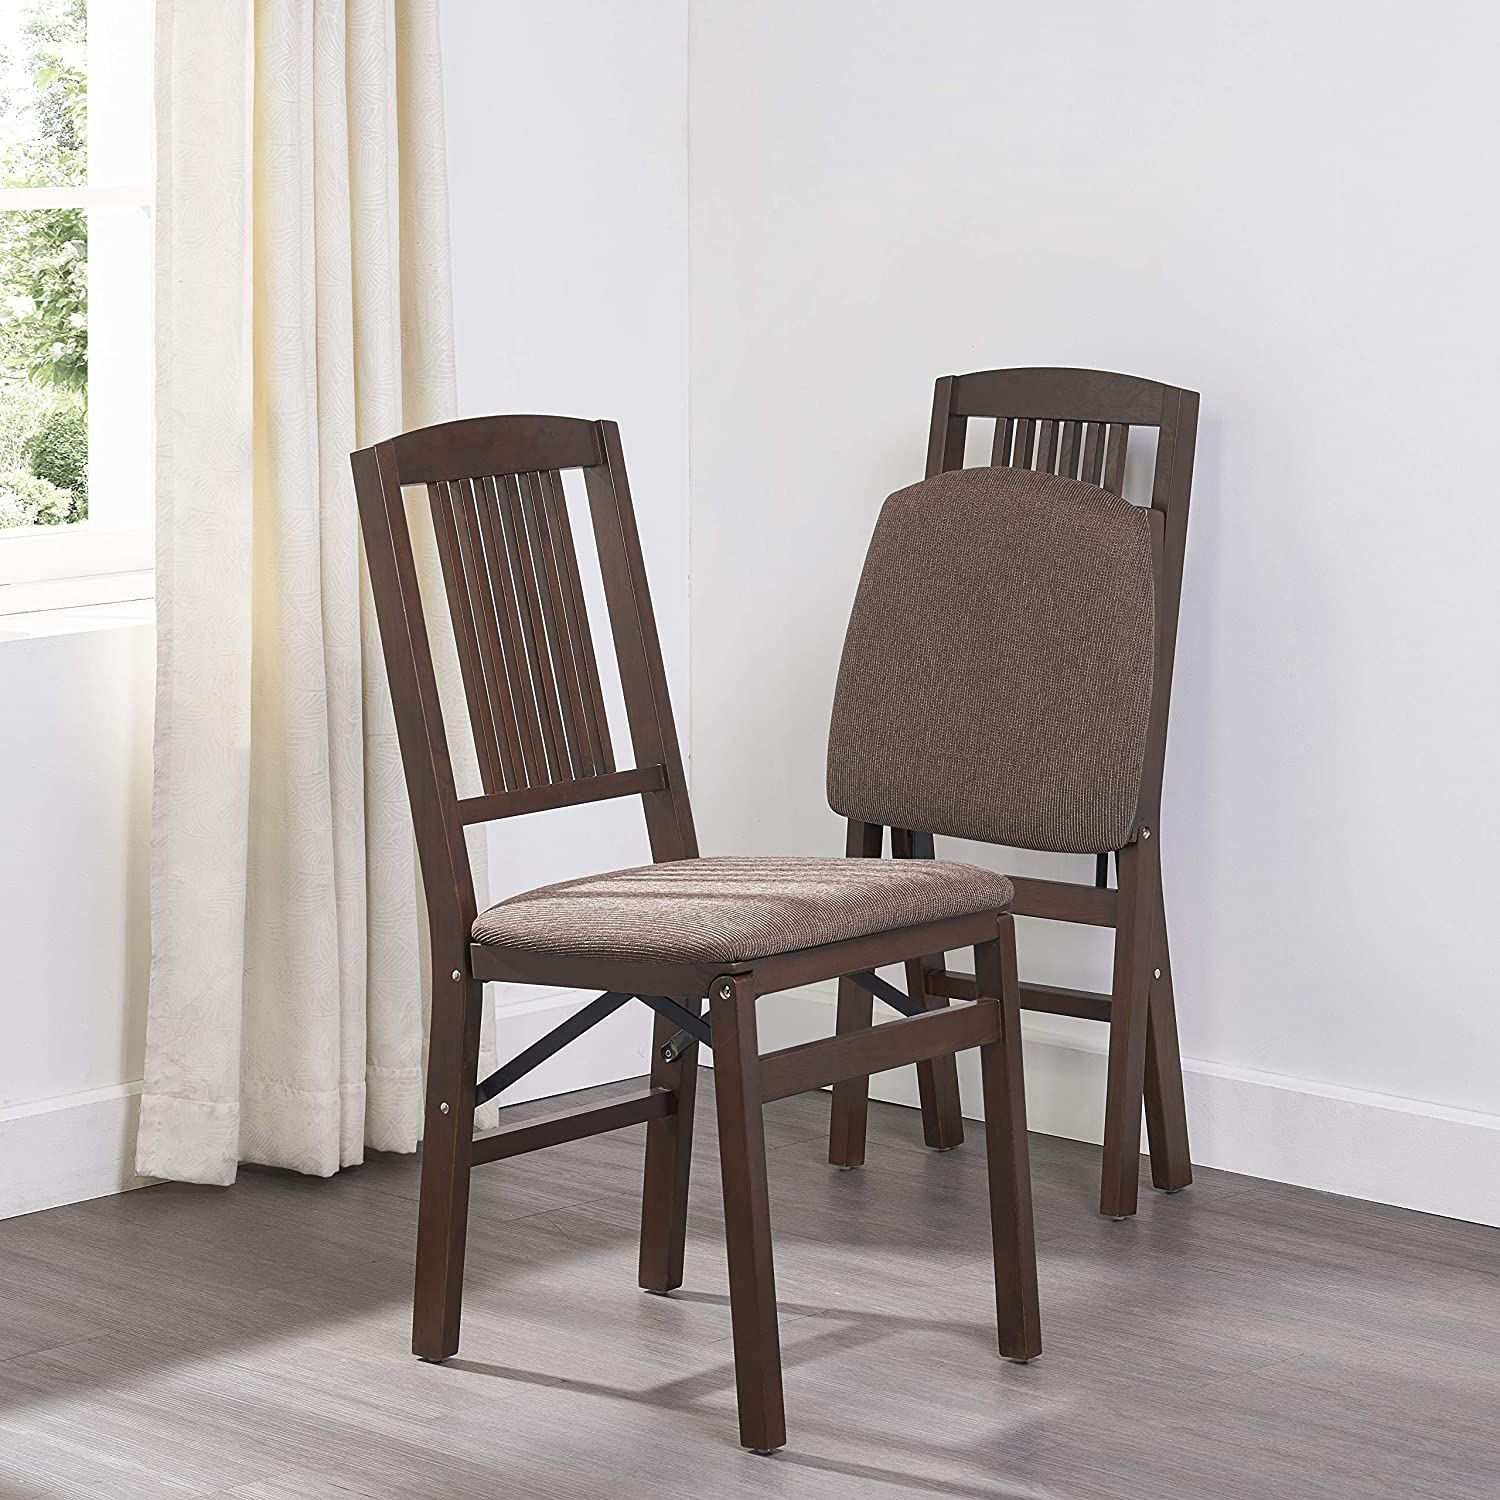 MECO Stakmore Wood Fabric Upholstered Seat Folding Chair Set, Espresso (2 Pack) - image 2 of 6